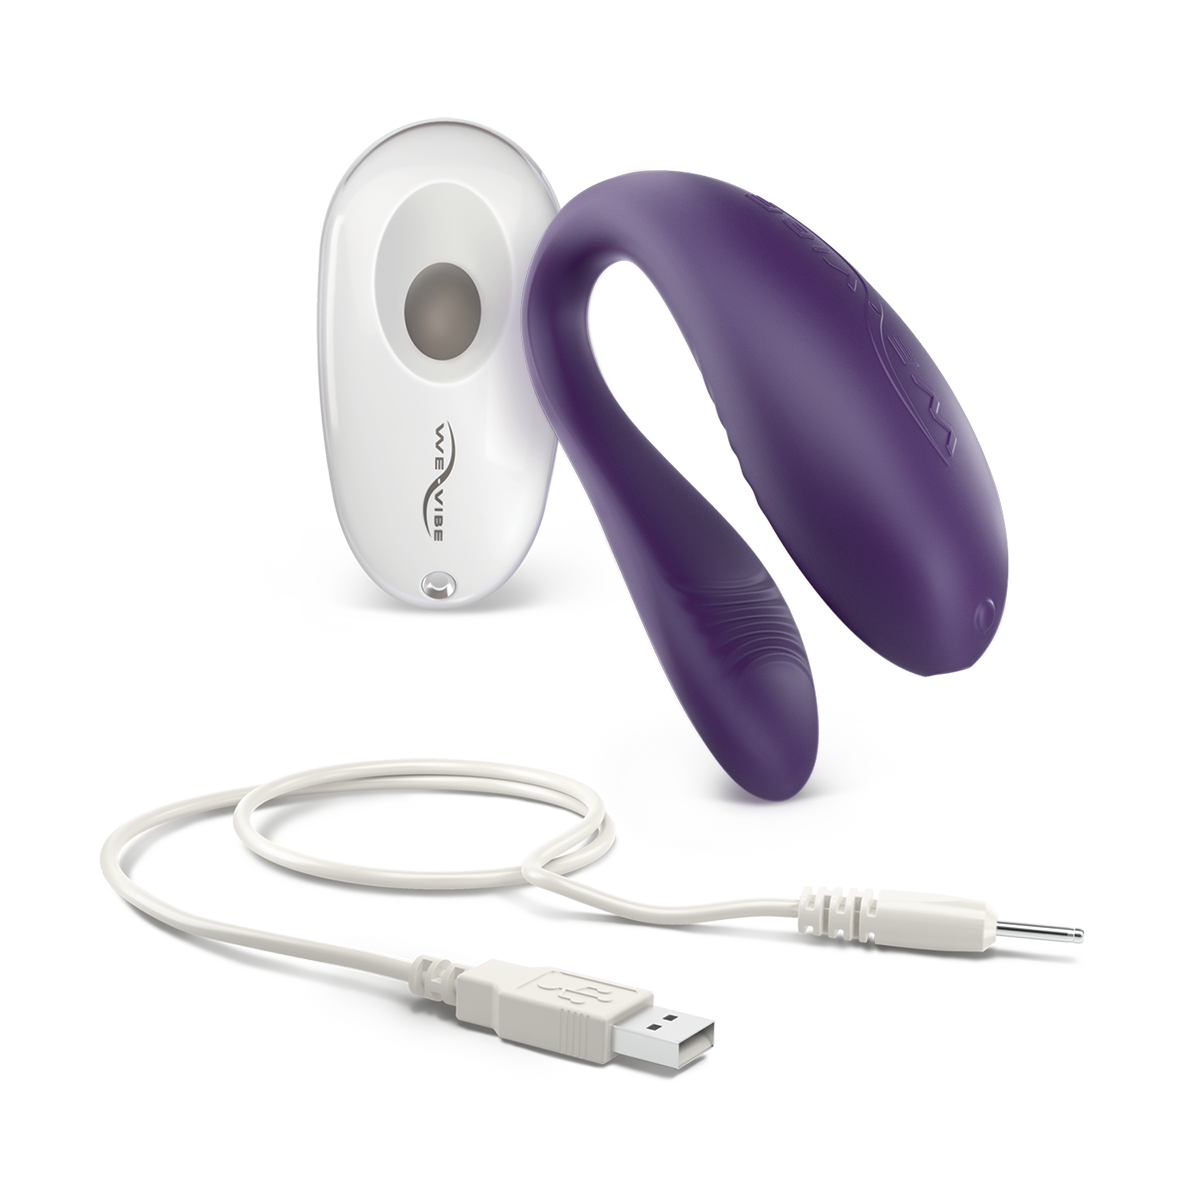 Unite vibrator with remote and charging cord